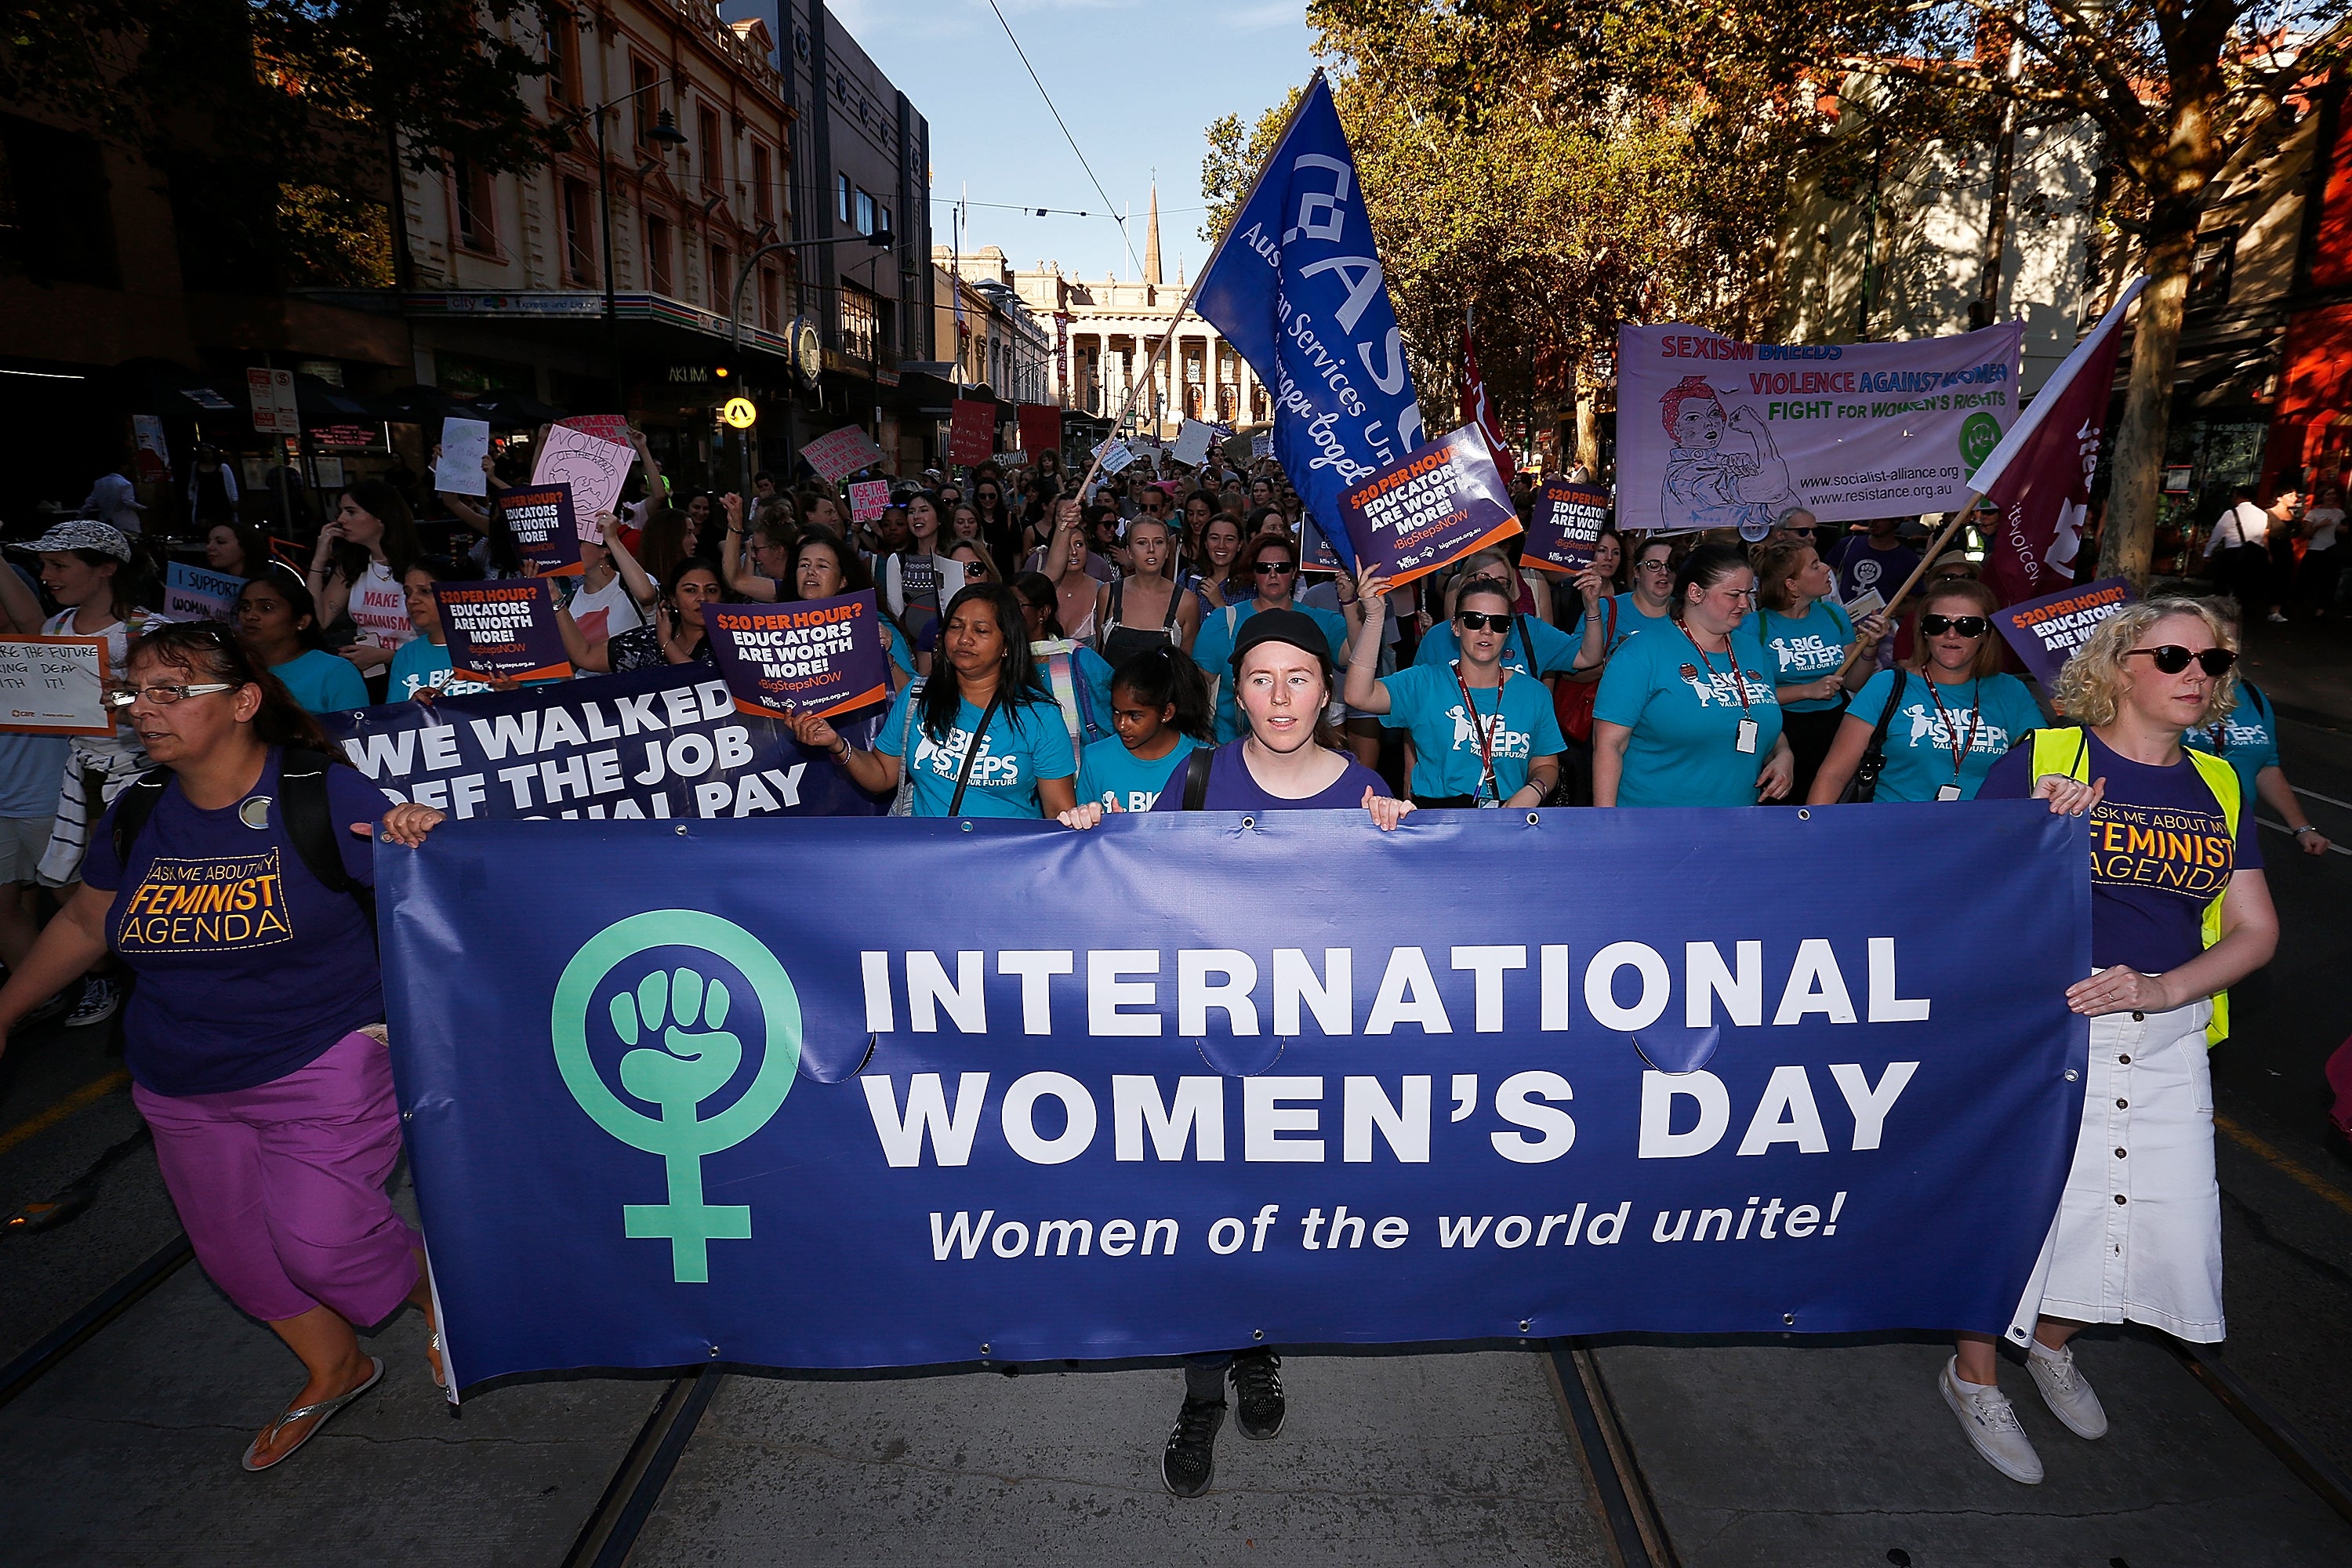 The debates are taking place on International Women’s Day and will be broadcast from nine countries